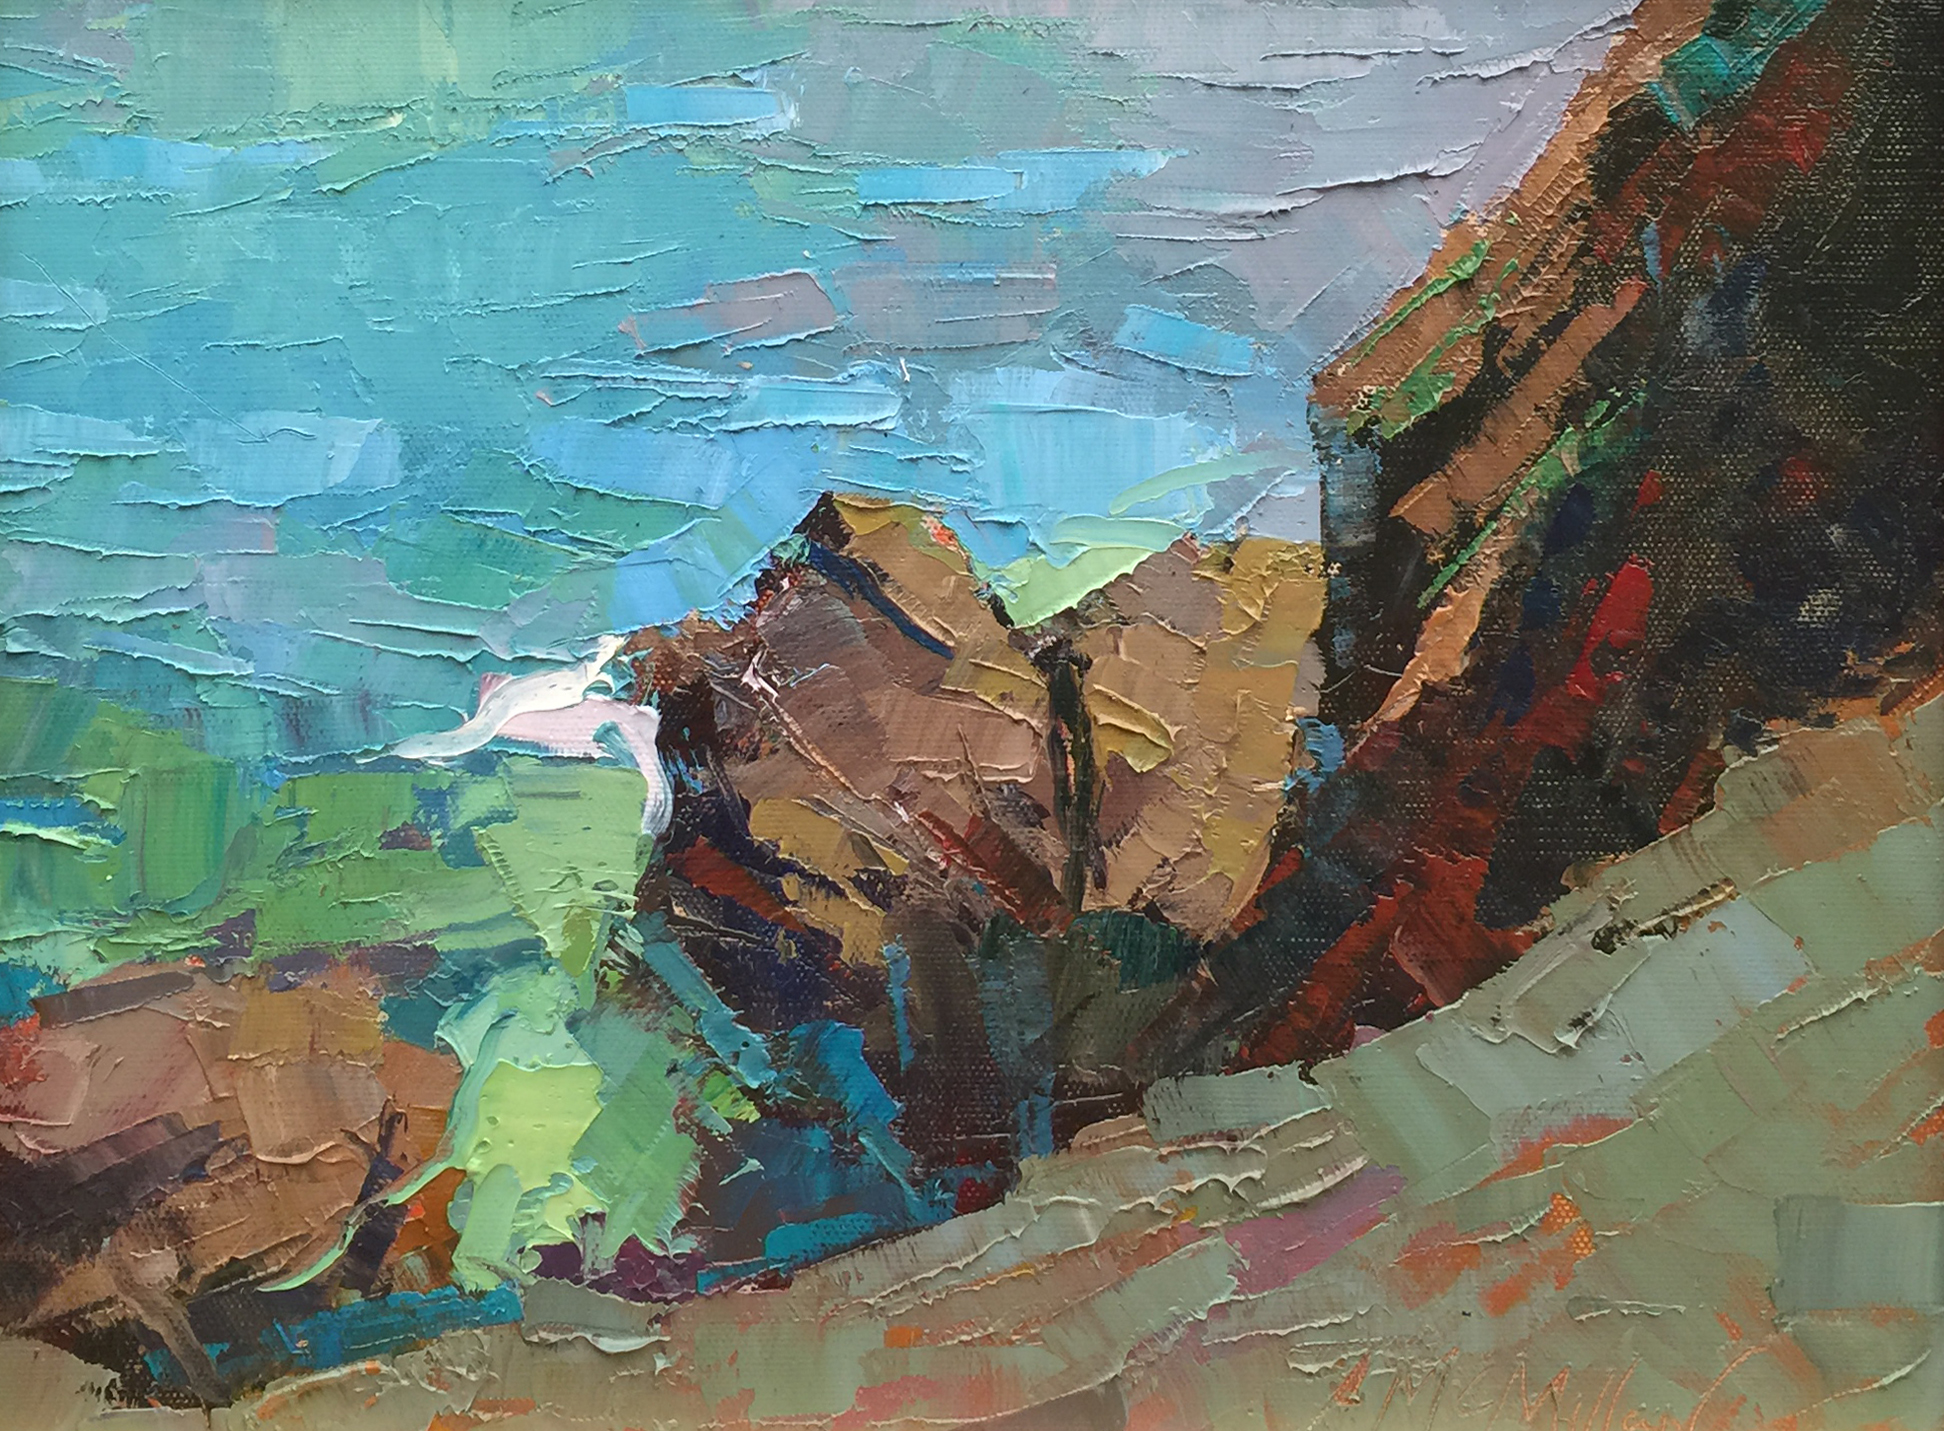 McMillan Mendocino Water Colors 11 c 14 inches oil 2015 no frame.jpg